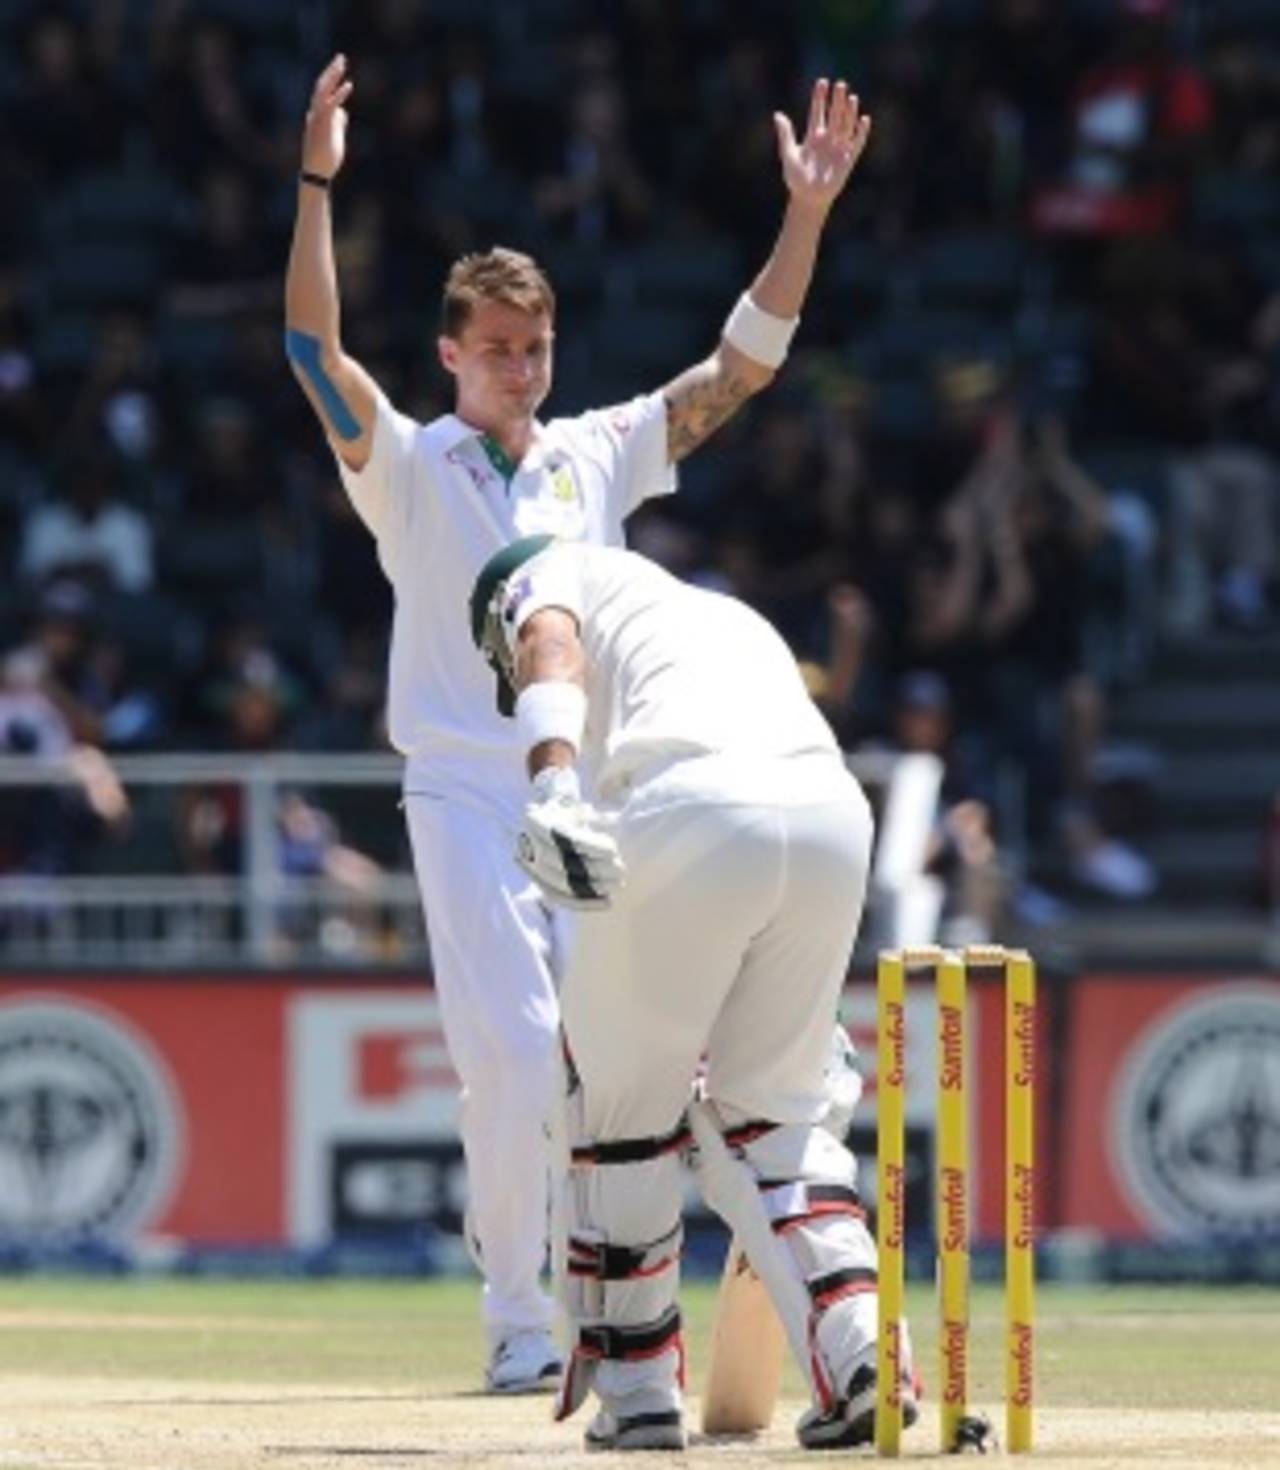 A Dale Steyn-special ends Misbah-ul-Haq's resistance, South Africa v Pakistan, 1st Test, Johannesburg, 4th day, February 4, 2013